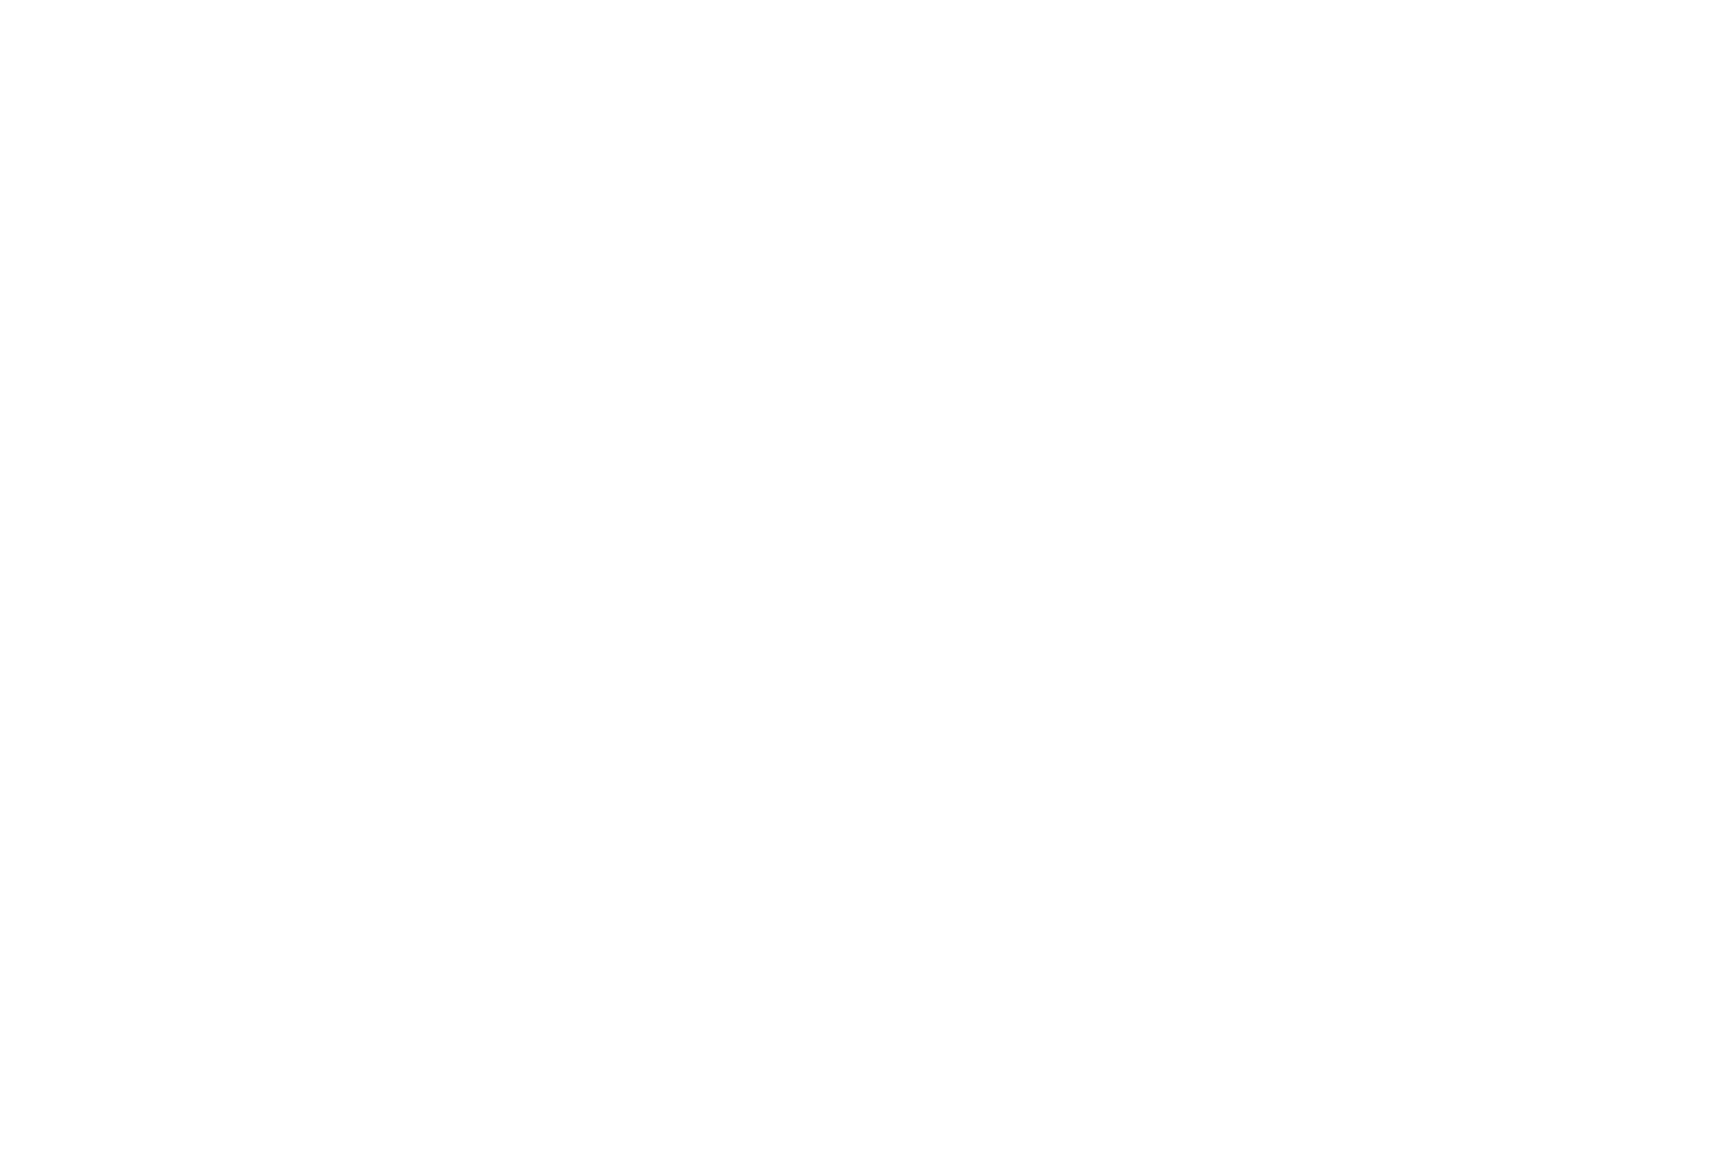 OFFICIAL SELECTION - Turnpike Film Festival - 2021.png